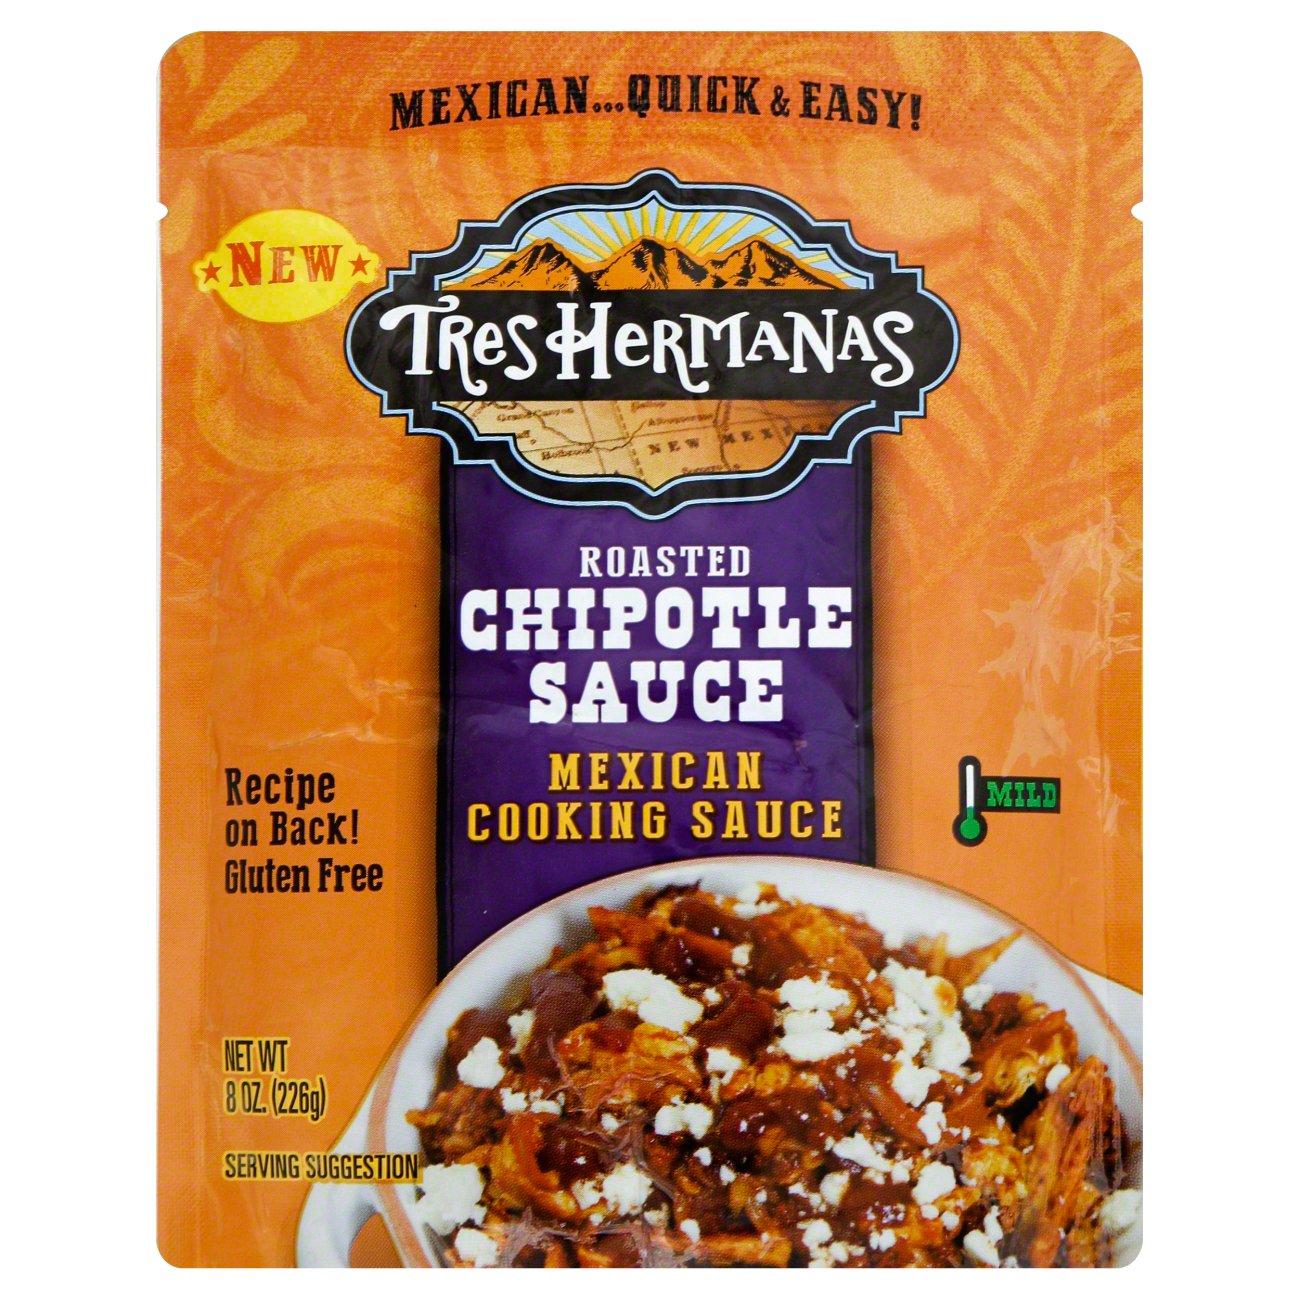 Tres Hermanas Roasted Chipotle Mexican Cooking Sauce Shop Cooking Sauces At H E B,Cooking Chestnuts On Bbq